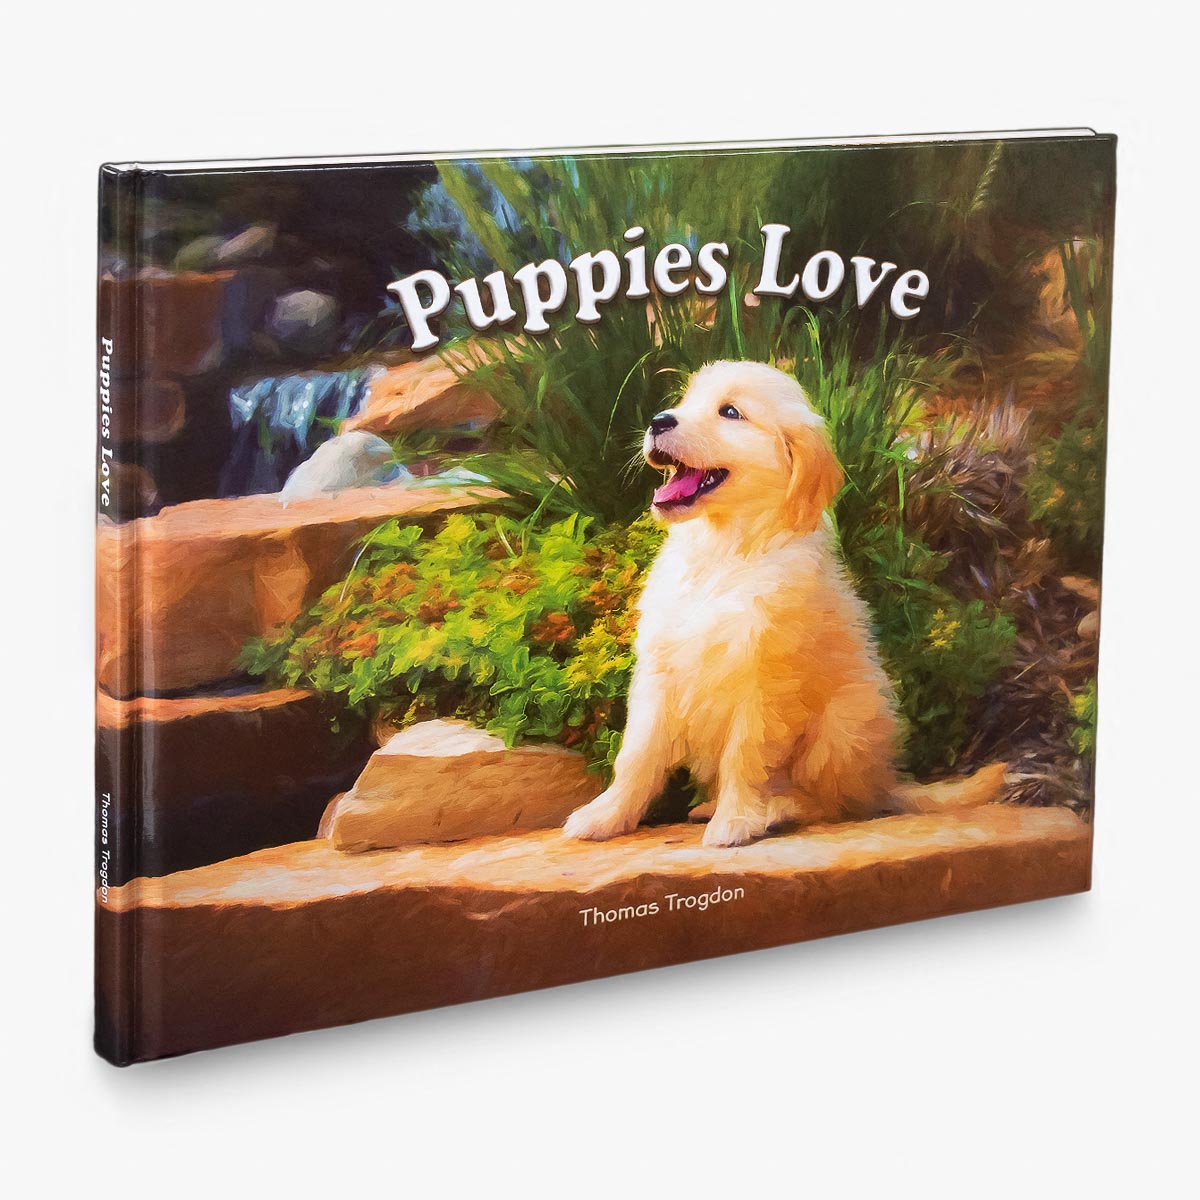 Puppies Love Children's Book Cover - Featured Image